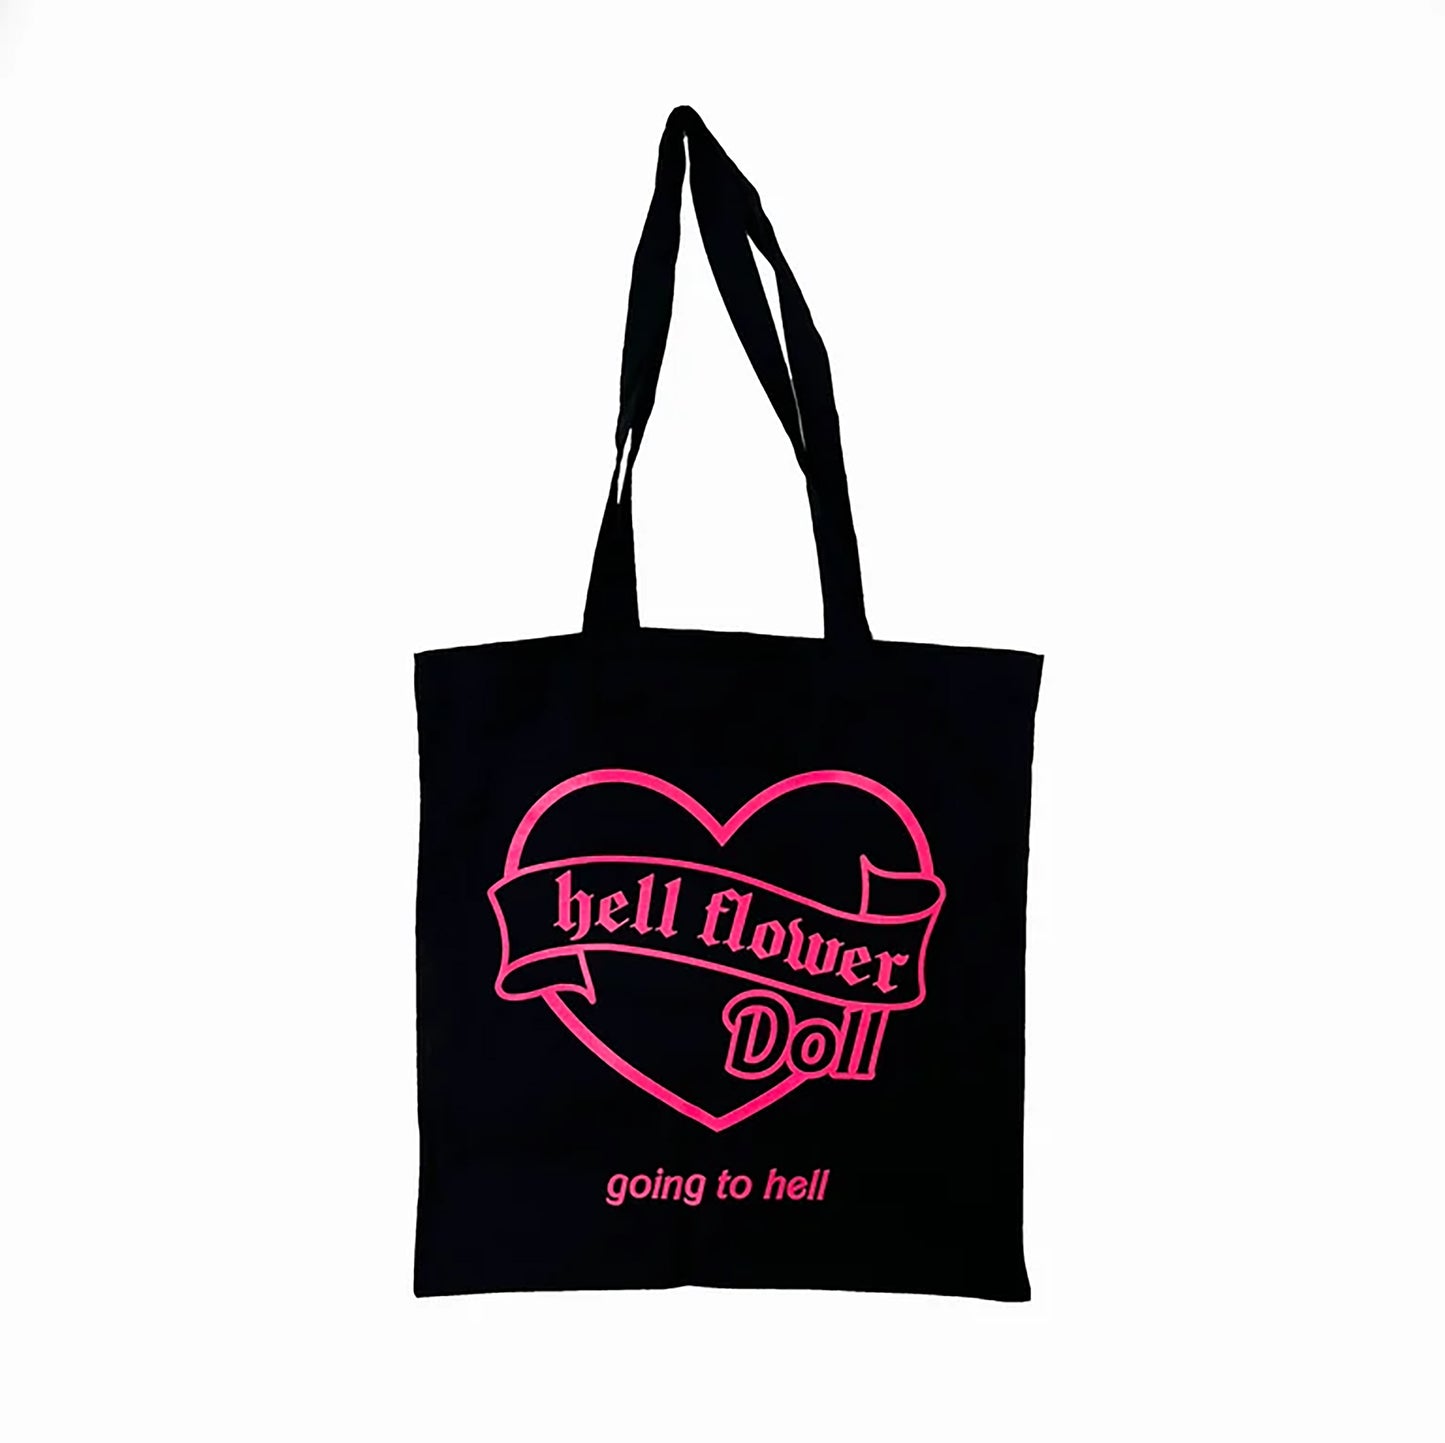 Hell Flower Doll tote Bag